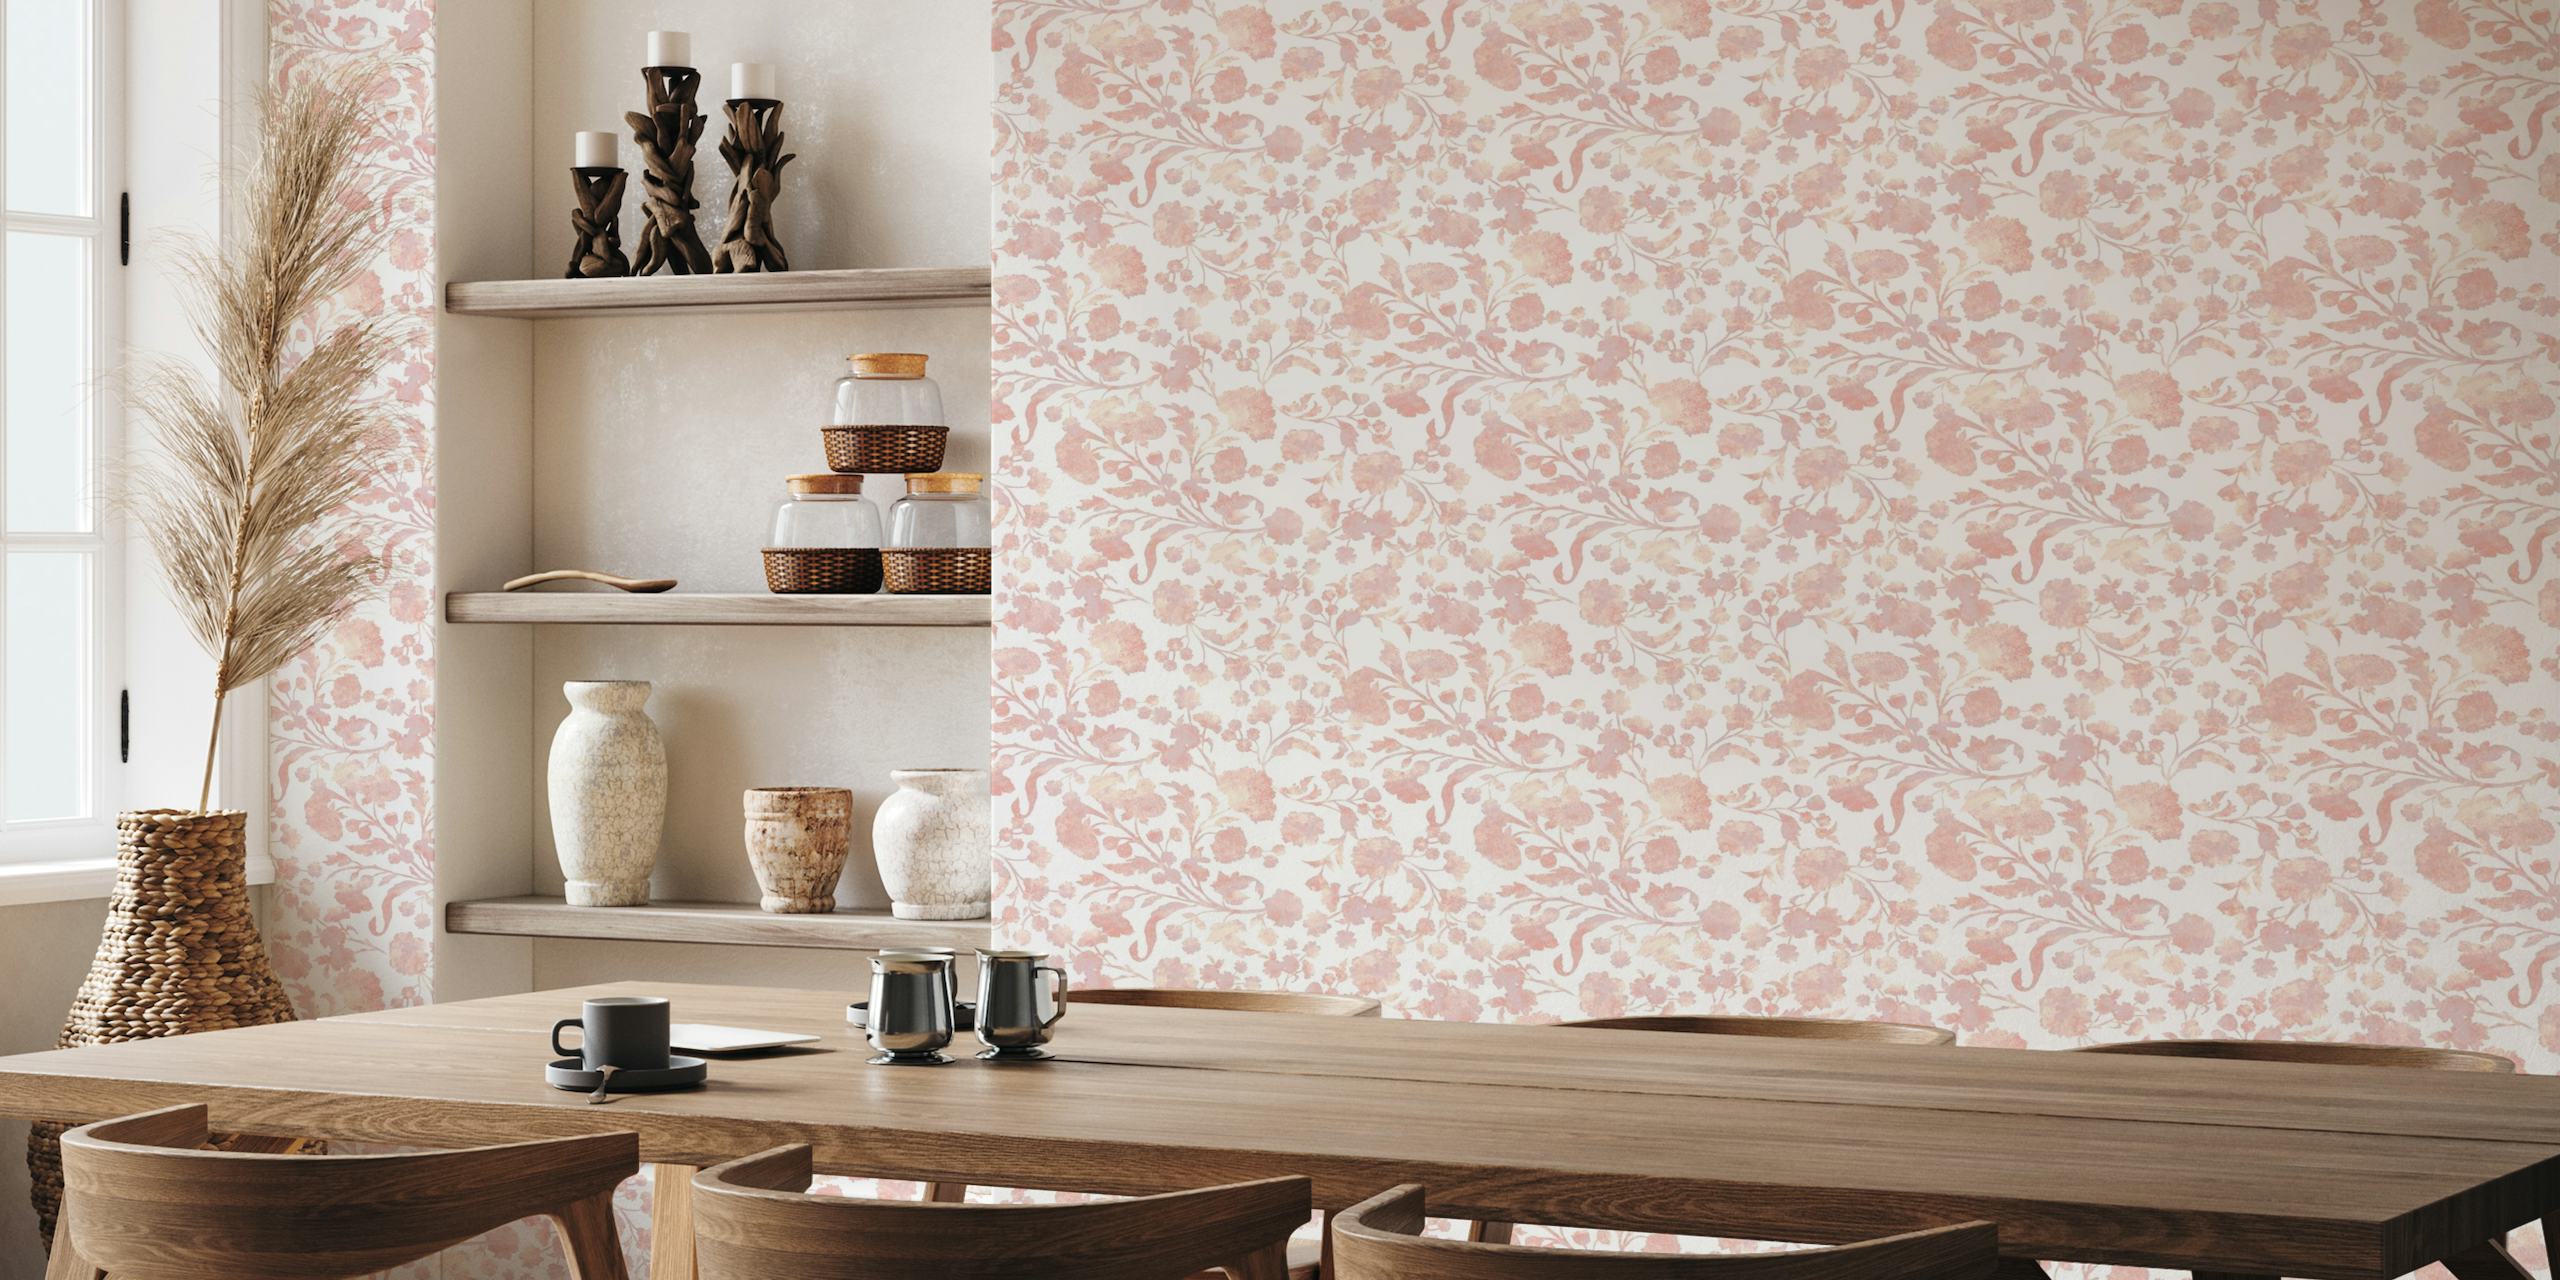 Elegant blush pink floral pattern on a textured background for wall mural